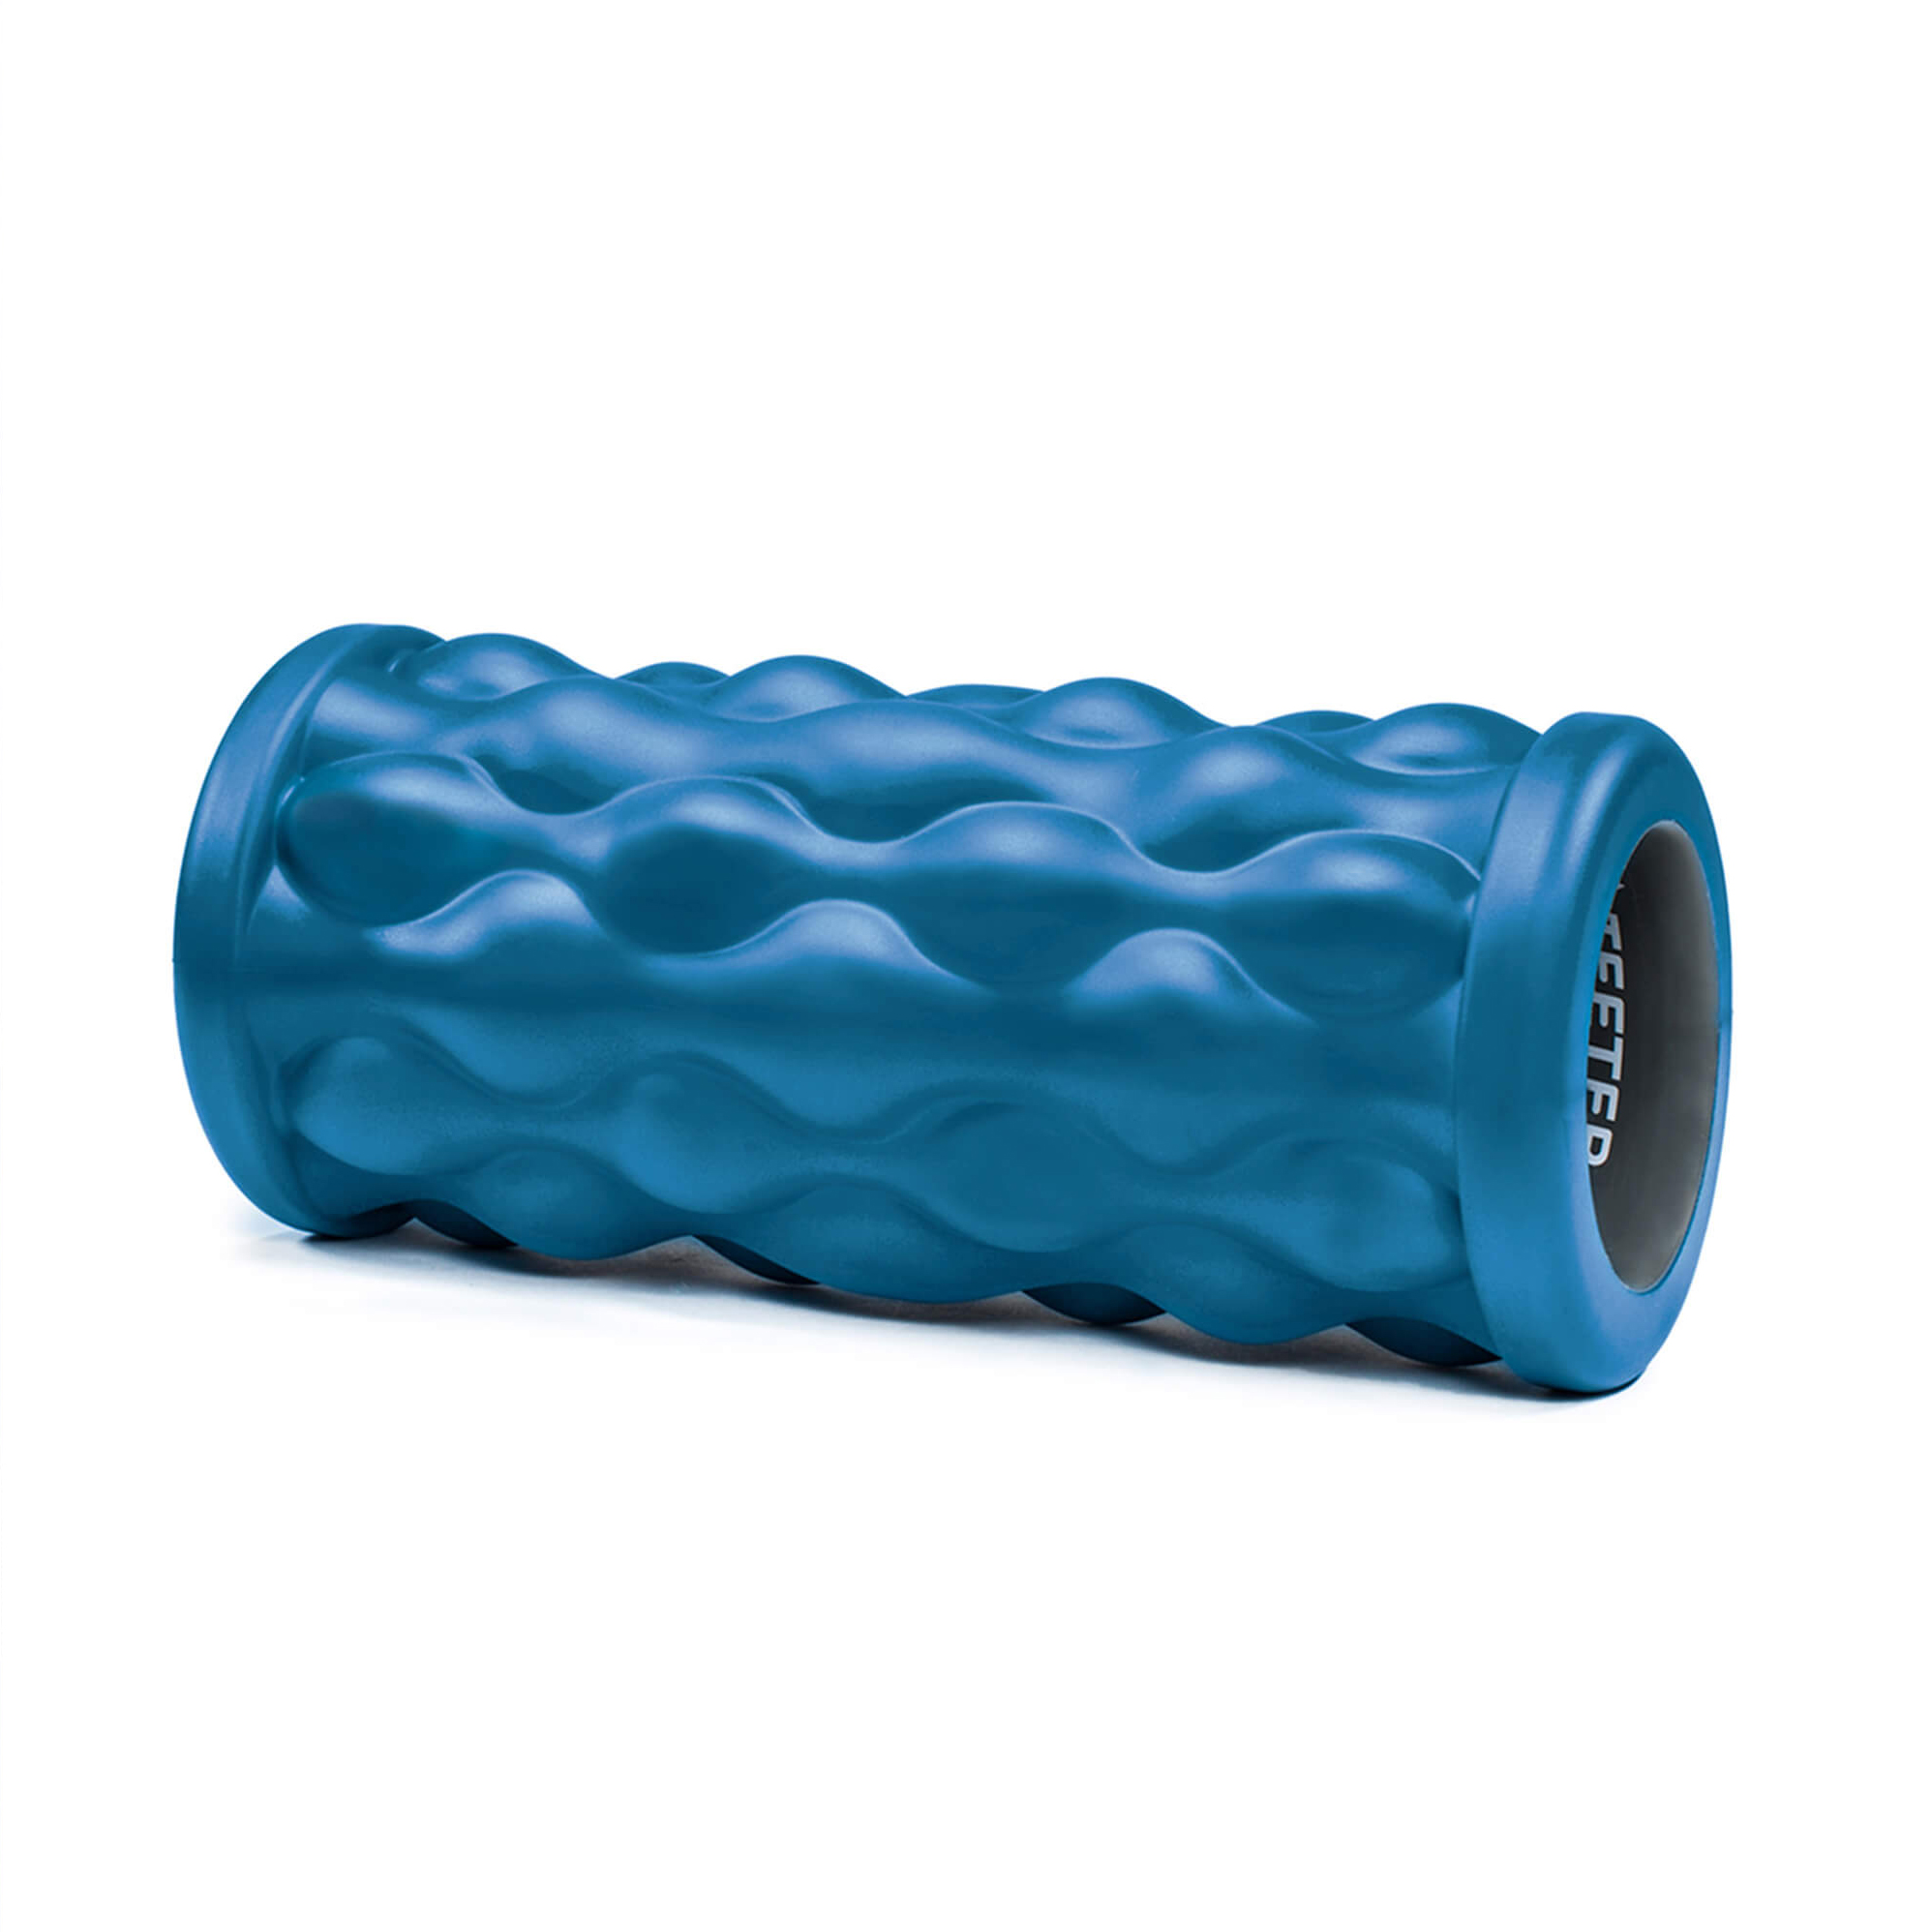 Flexibility Back Pain Relief Textured for Deep Tissue Muscle Relief to Boost Recovery Teeter Massage Foam Roller Bundle Sports Massage Mobility Myofascial Release 